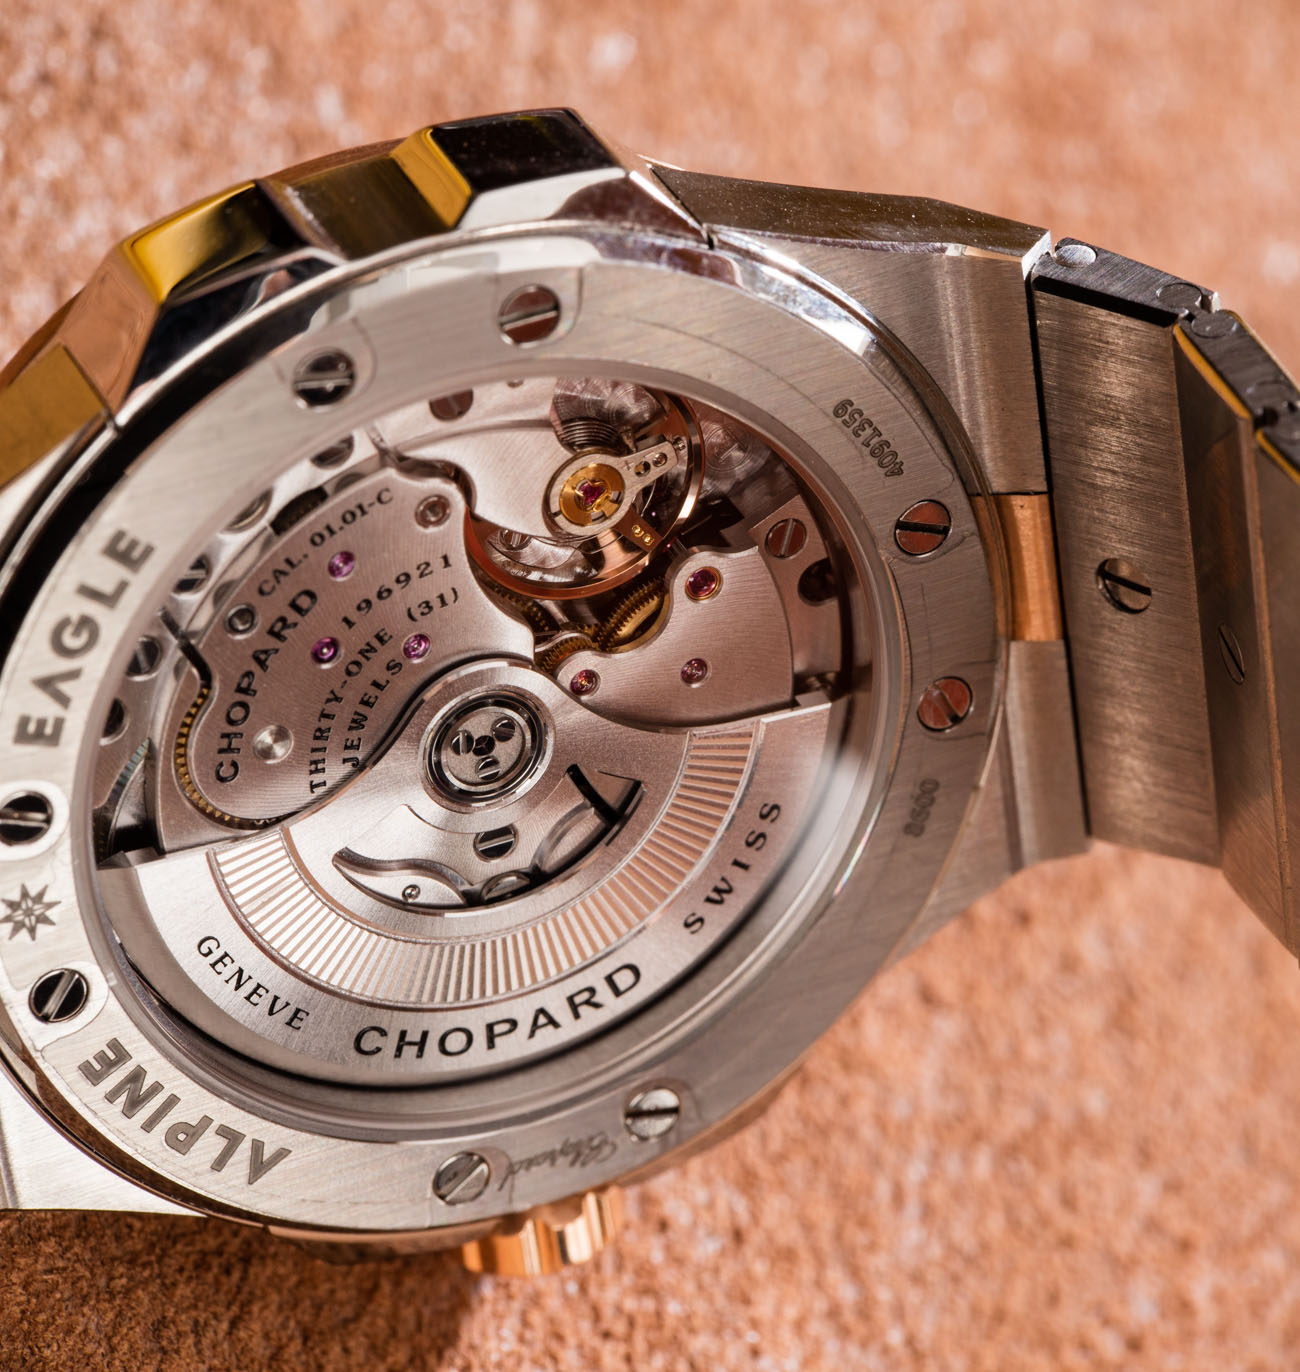 The New Chopard Alpine Eagle Automatic 2.0 embody the best of Chopard